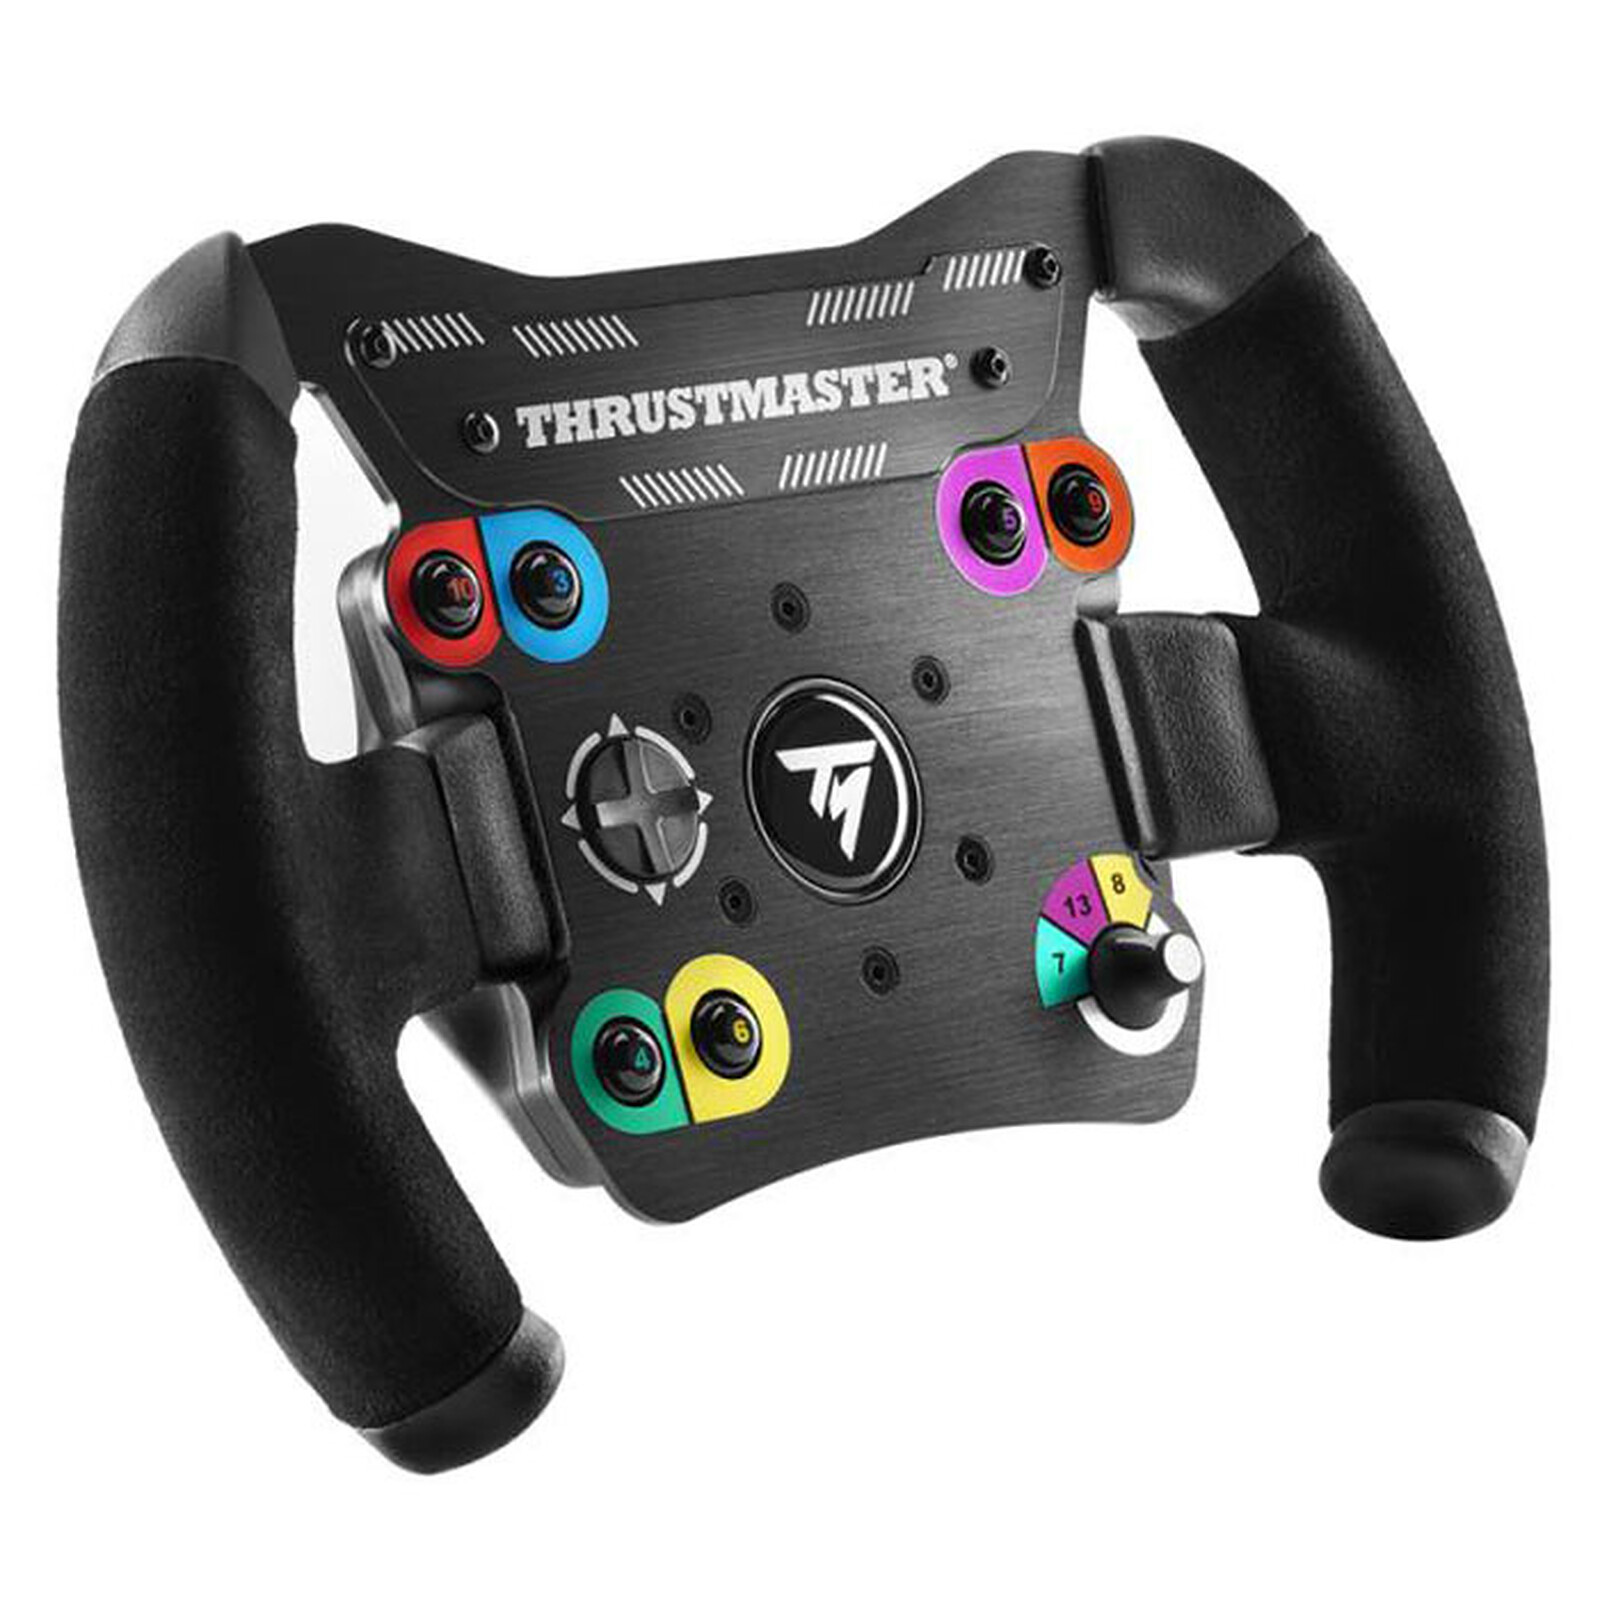 Thrustmaster T150 RS edition - Gamepad - Sony PlayStation 4